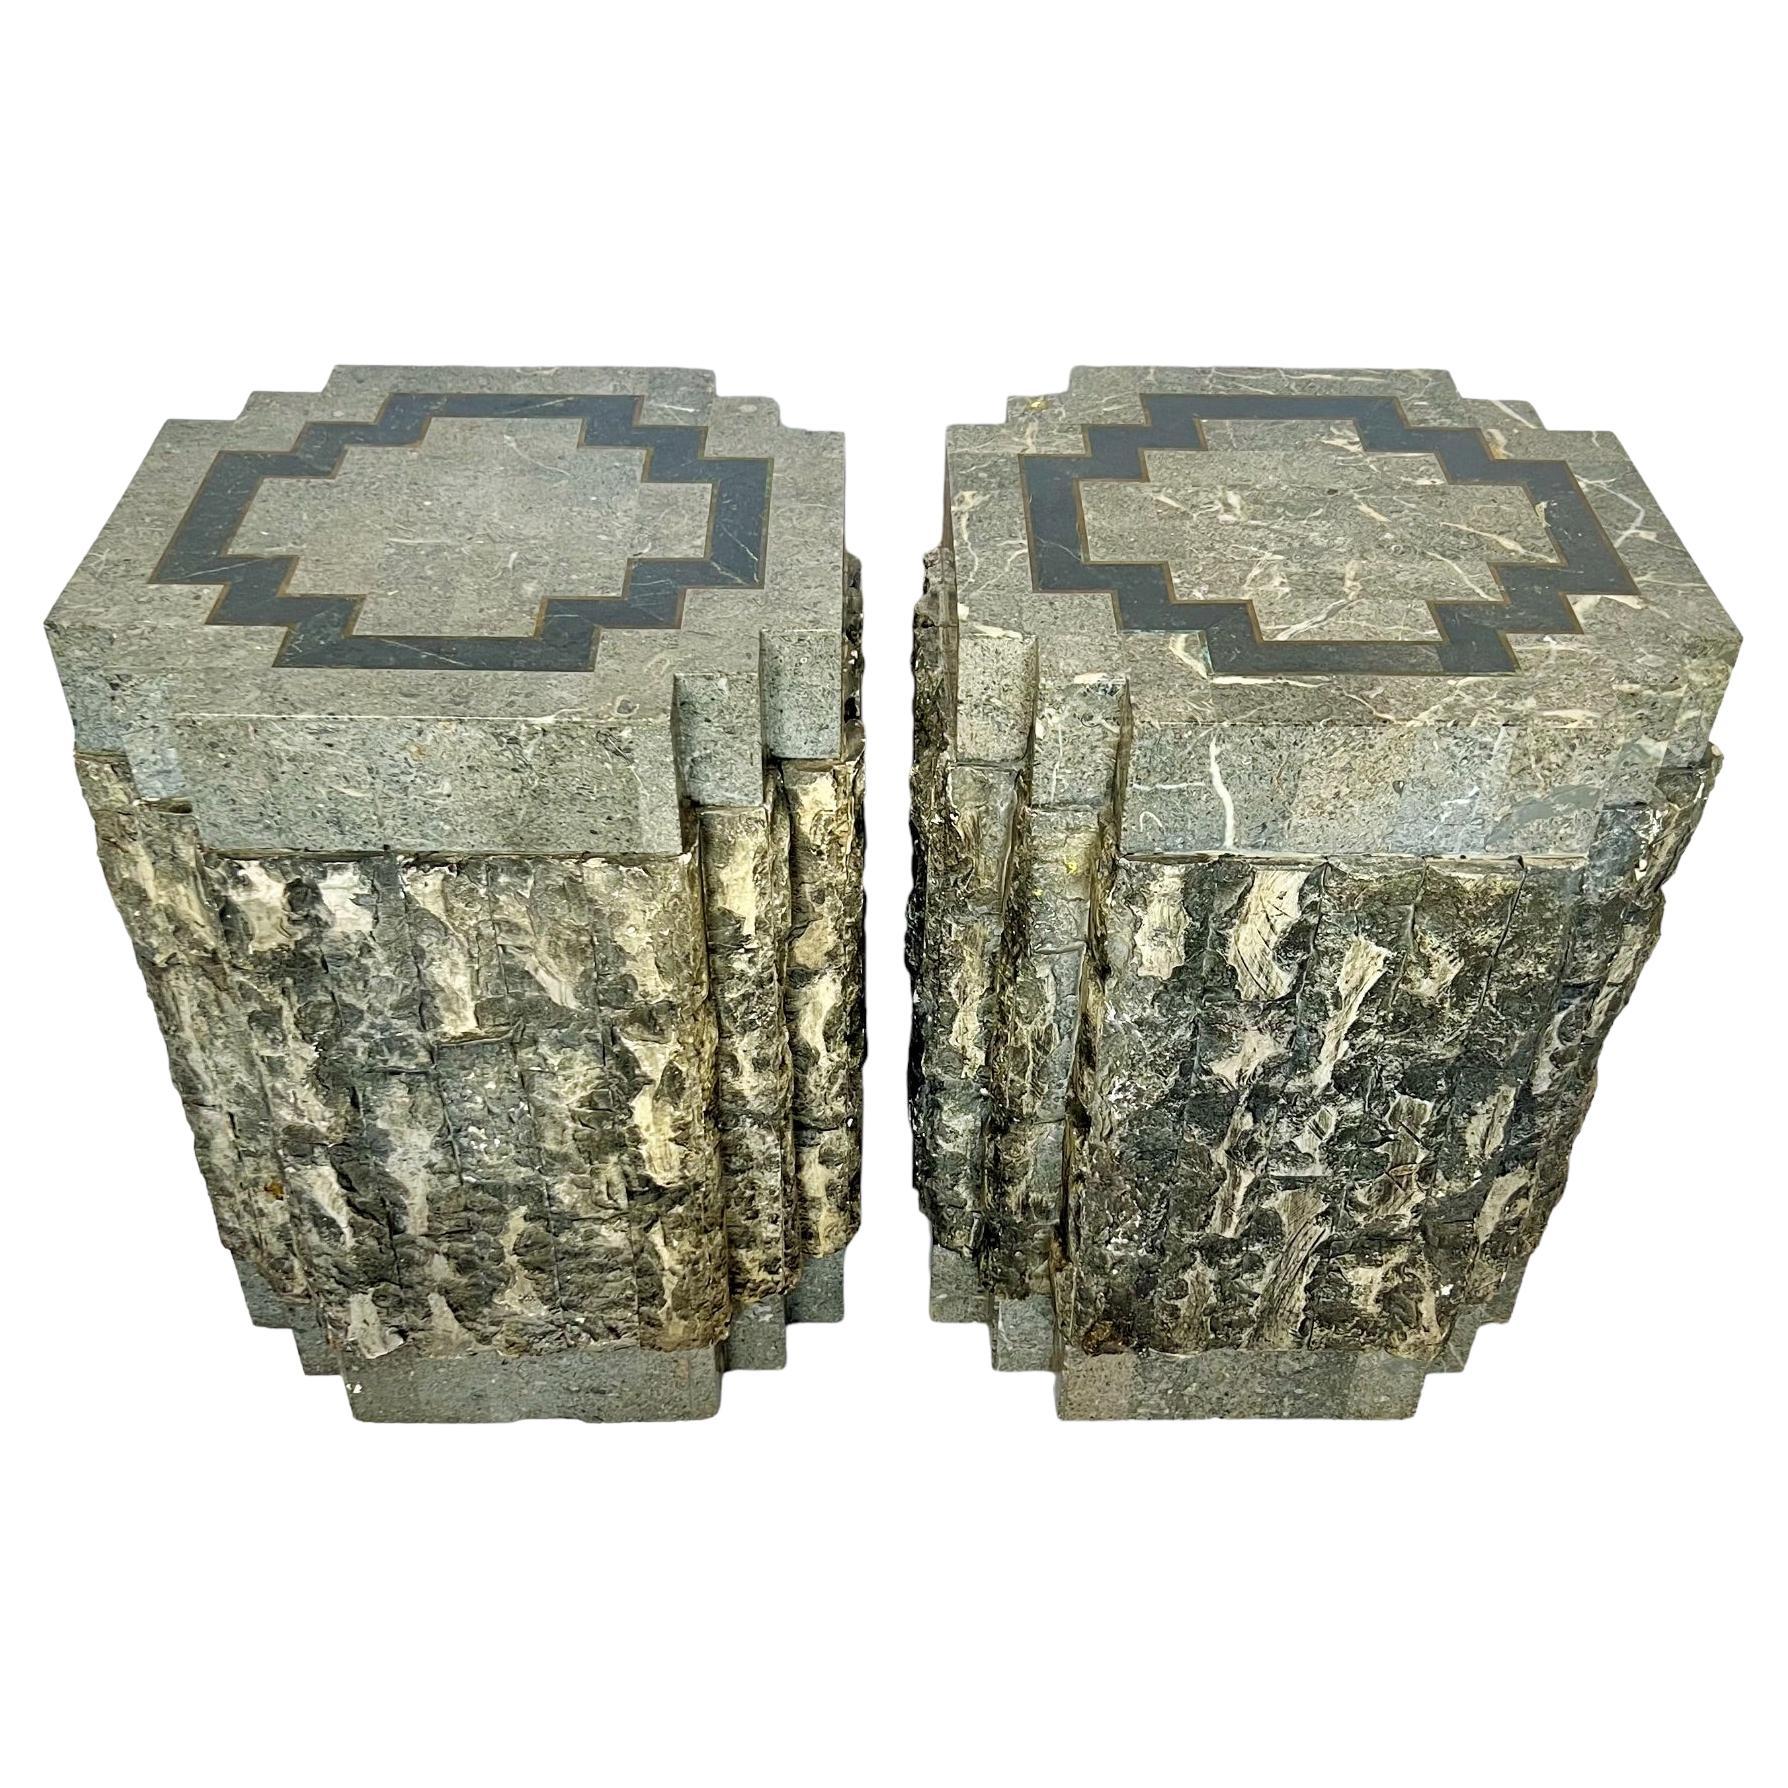 Postmodern Tessellated Stone Brass Inlay Pedestal Tables, a Pair